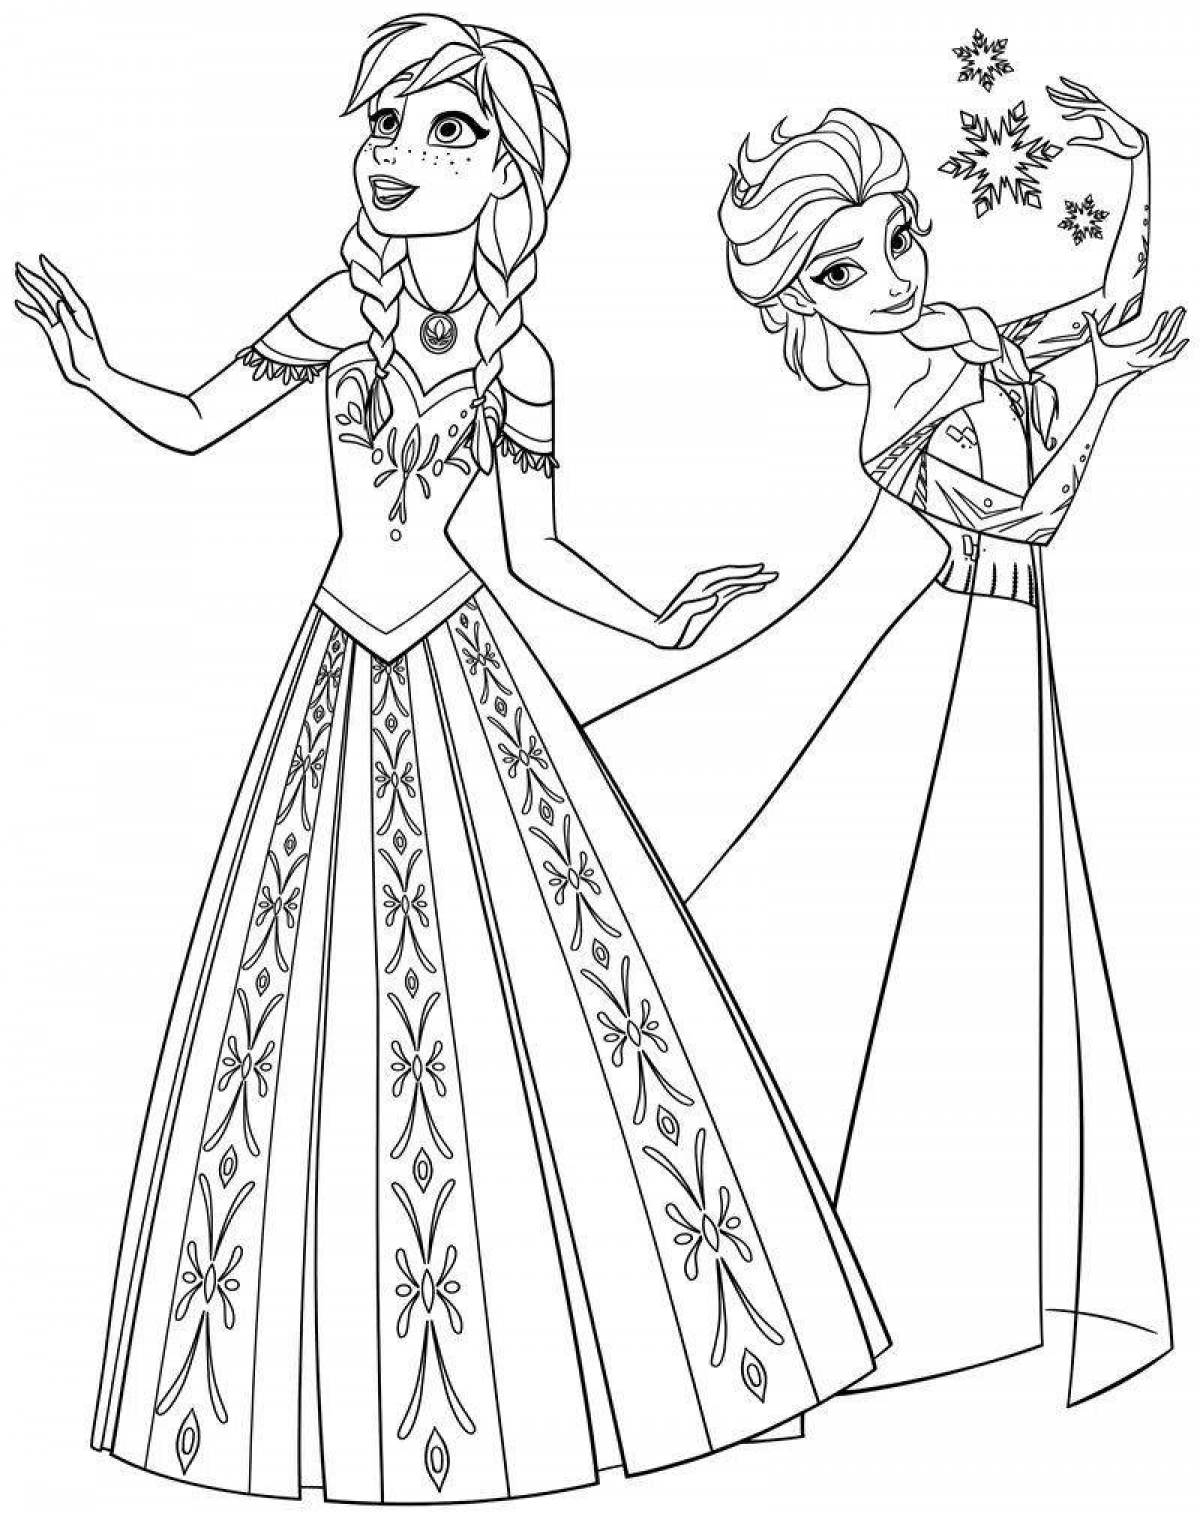 Elsa shining coloring book for kids 6-7 years old